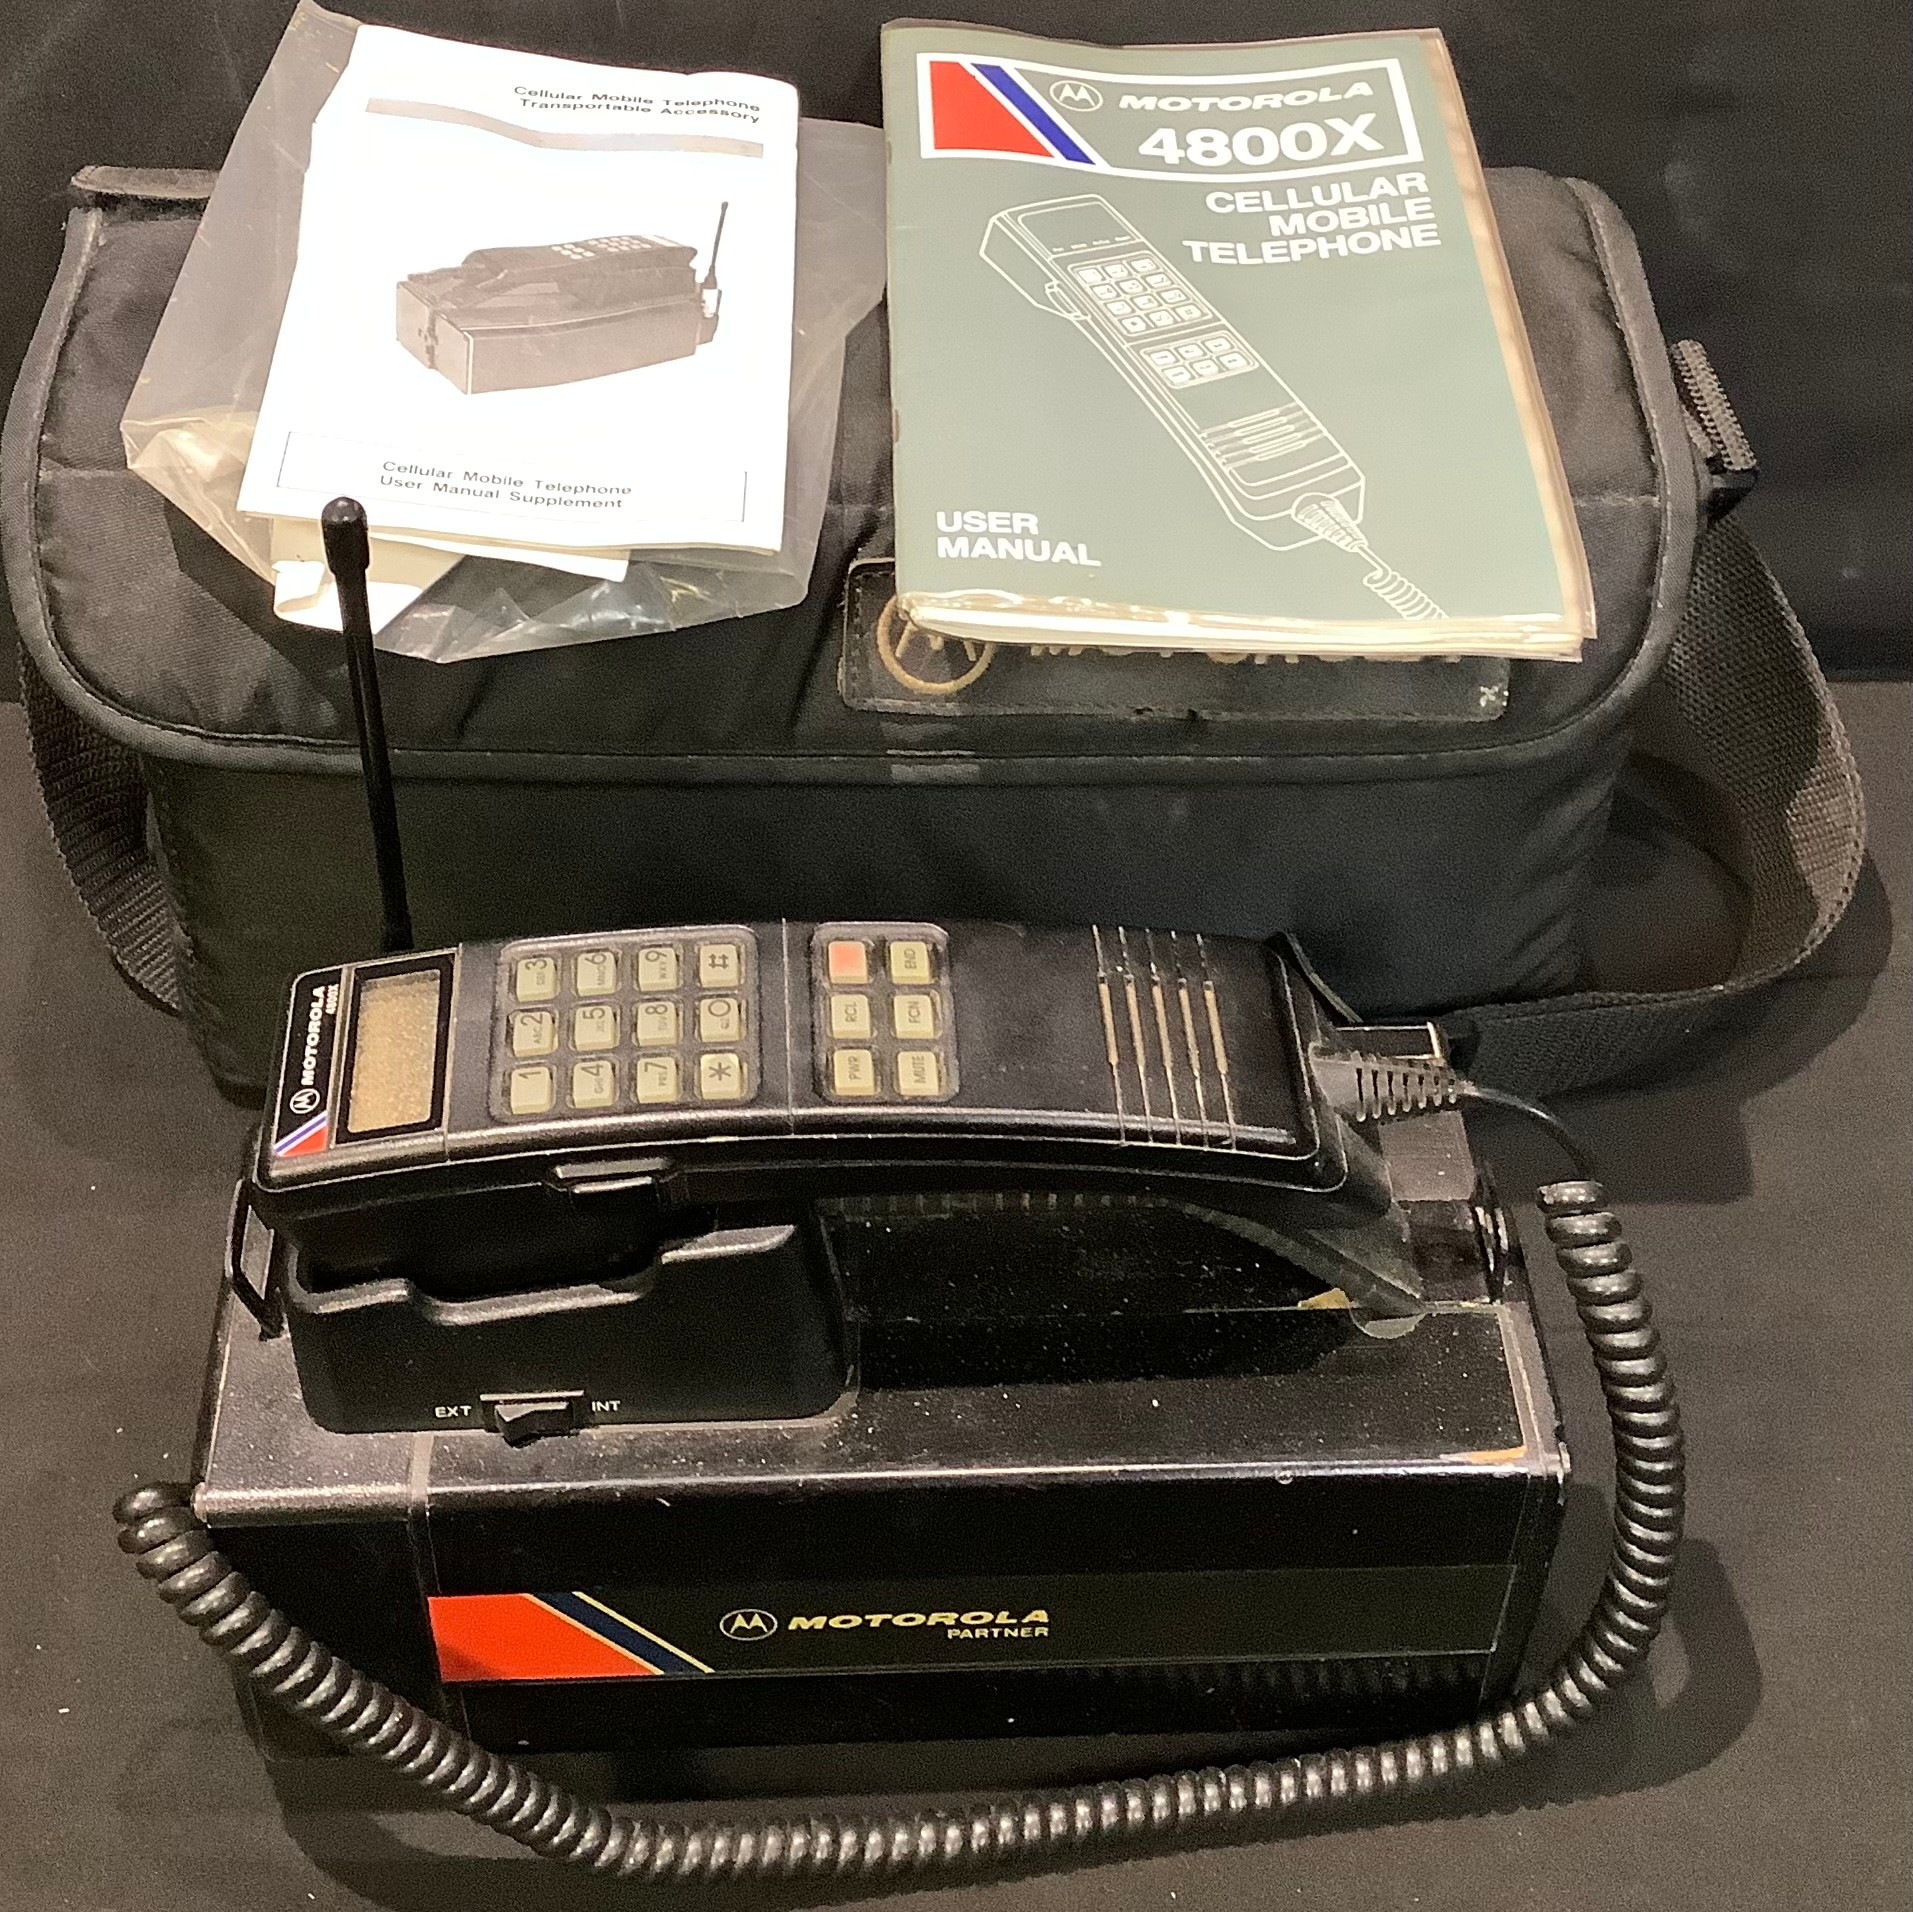 A Motorola 4800x mobile phone and battery pack, c.1989